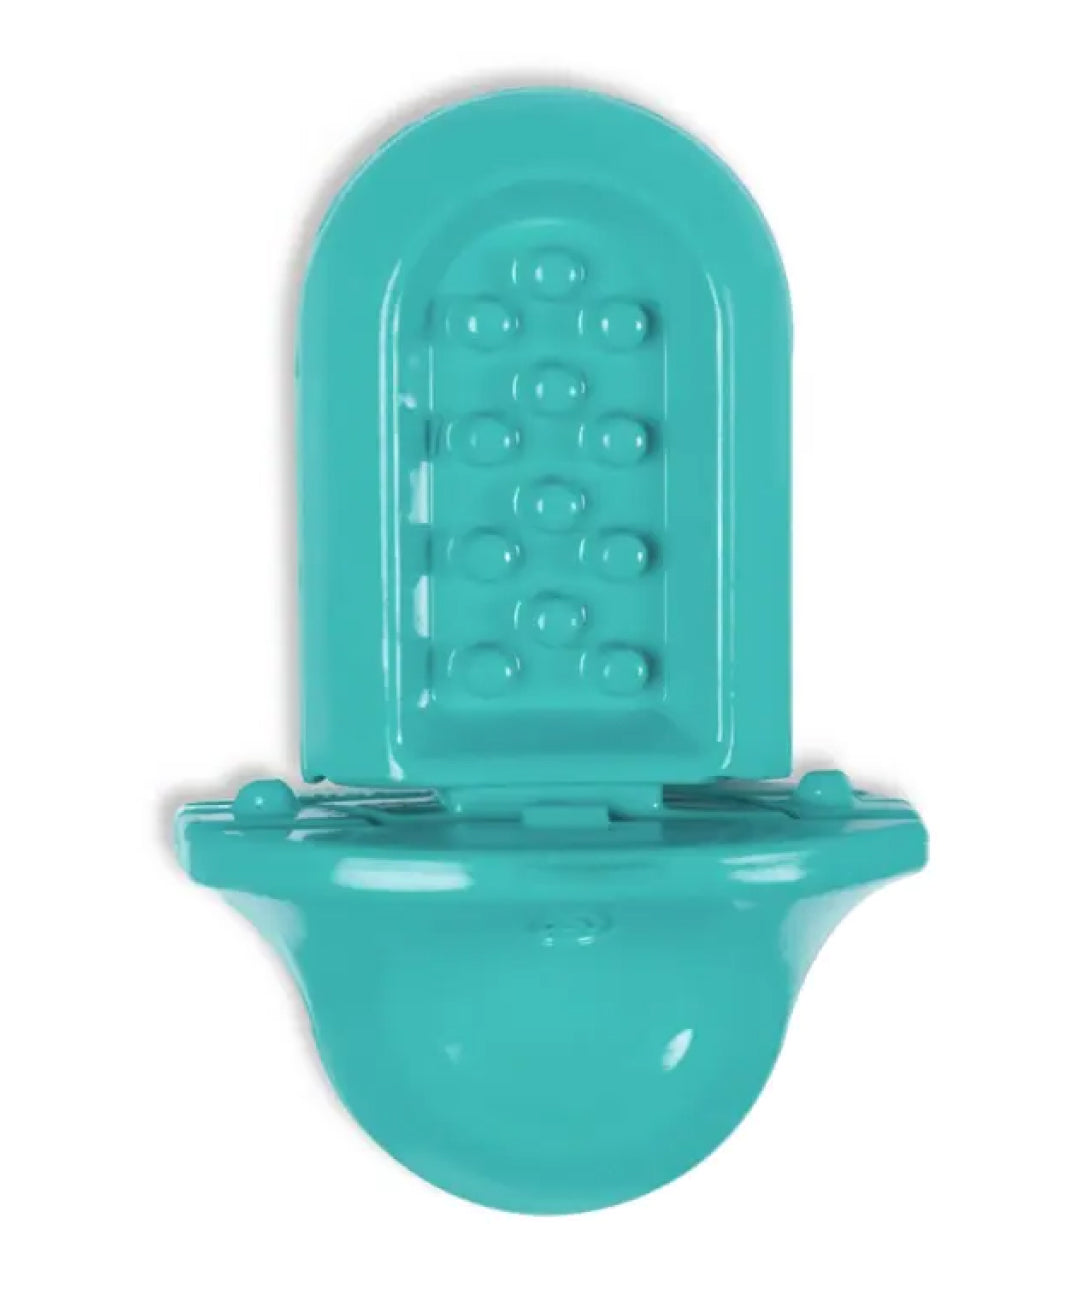 Diggs Groov Lickable Crate Training Tool Diggs Inc. Turquoise 